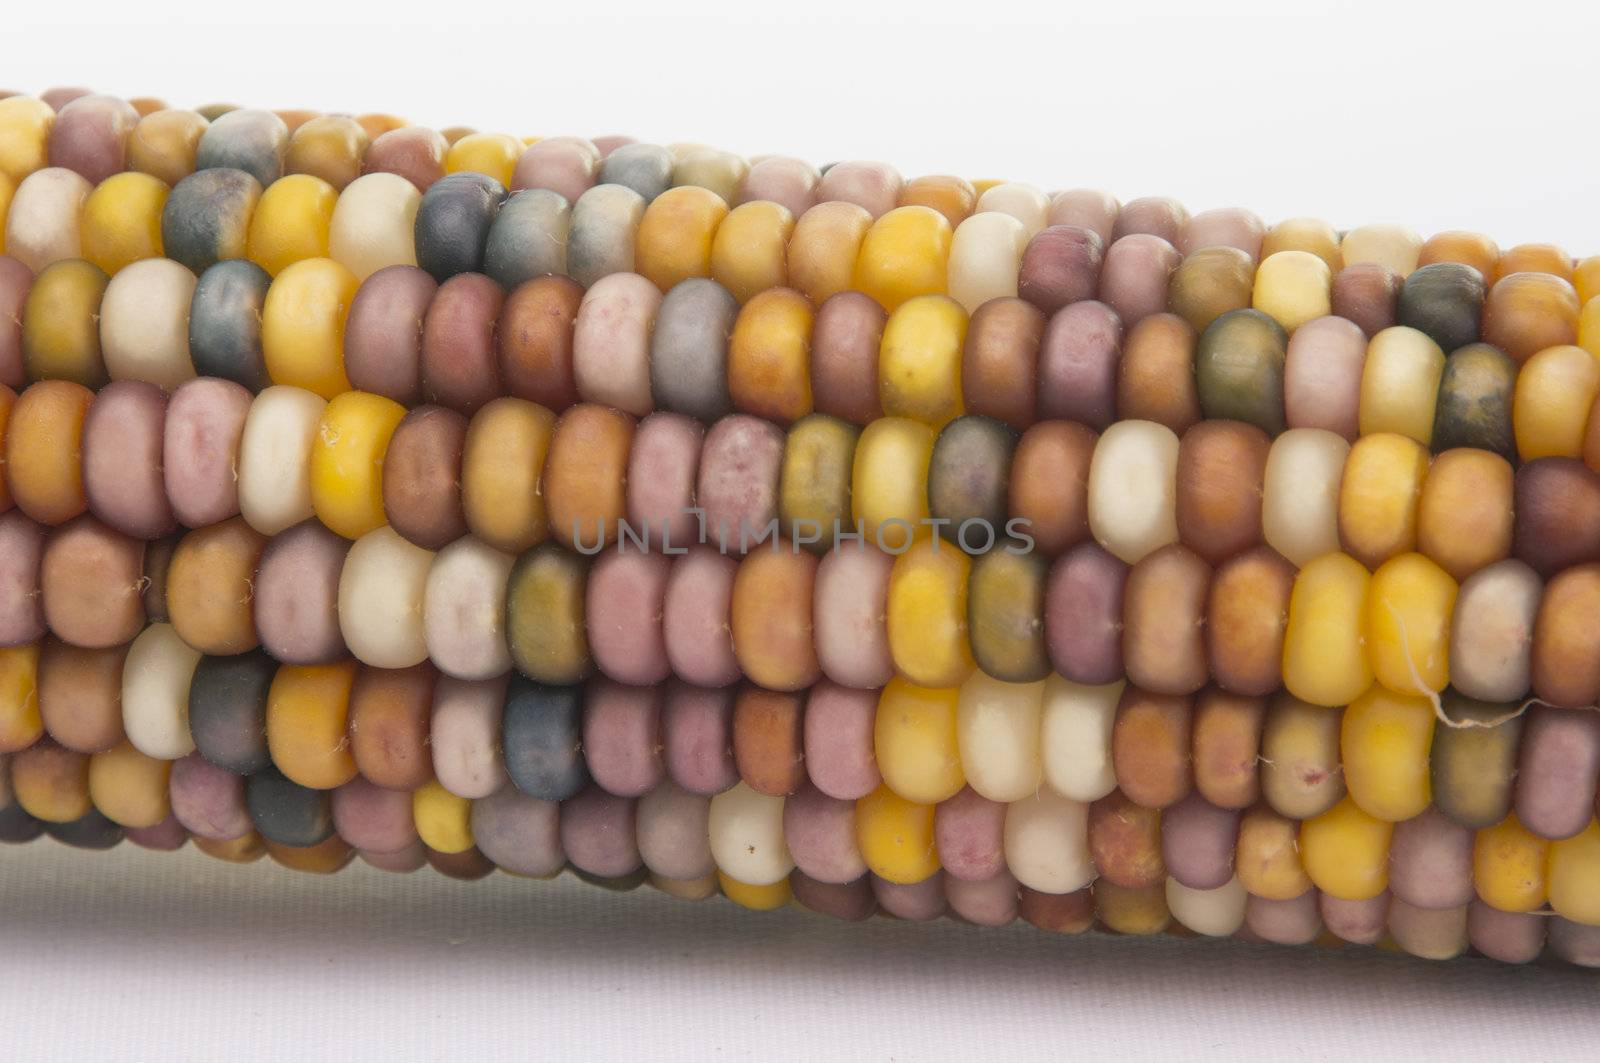 Studio shot of Indian Corn (maize) isoalted on white background with light shadow